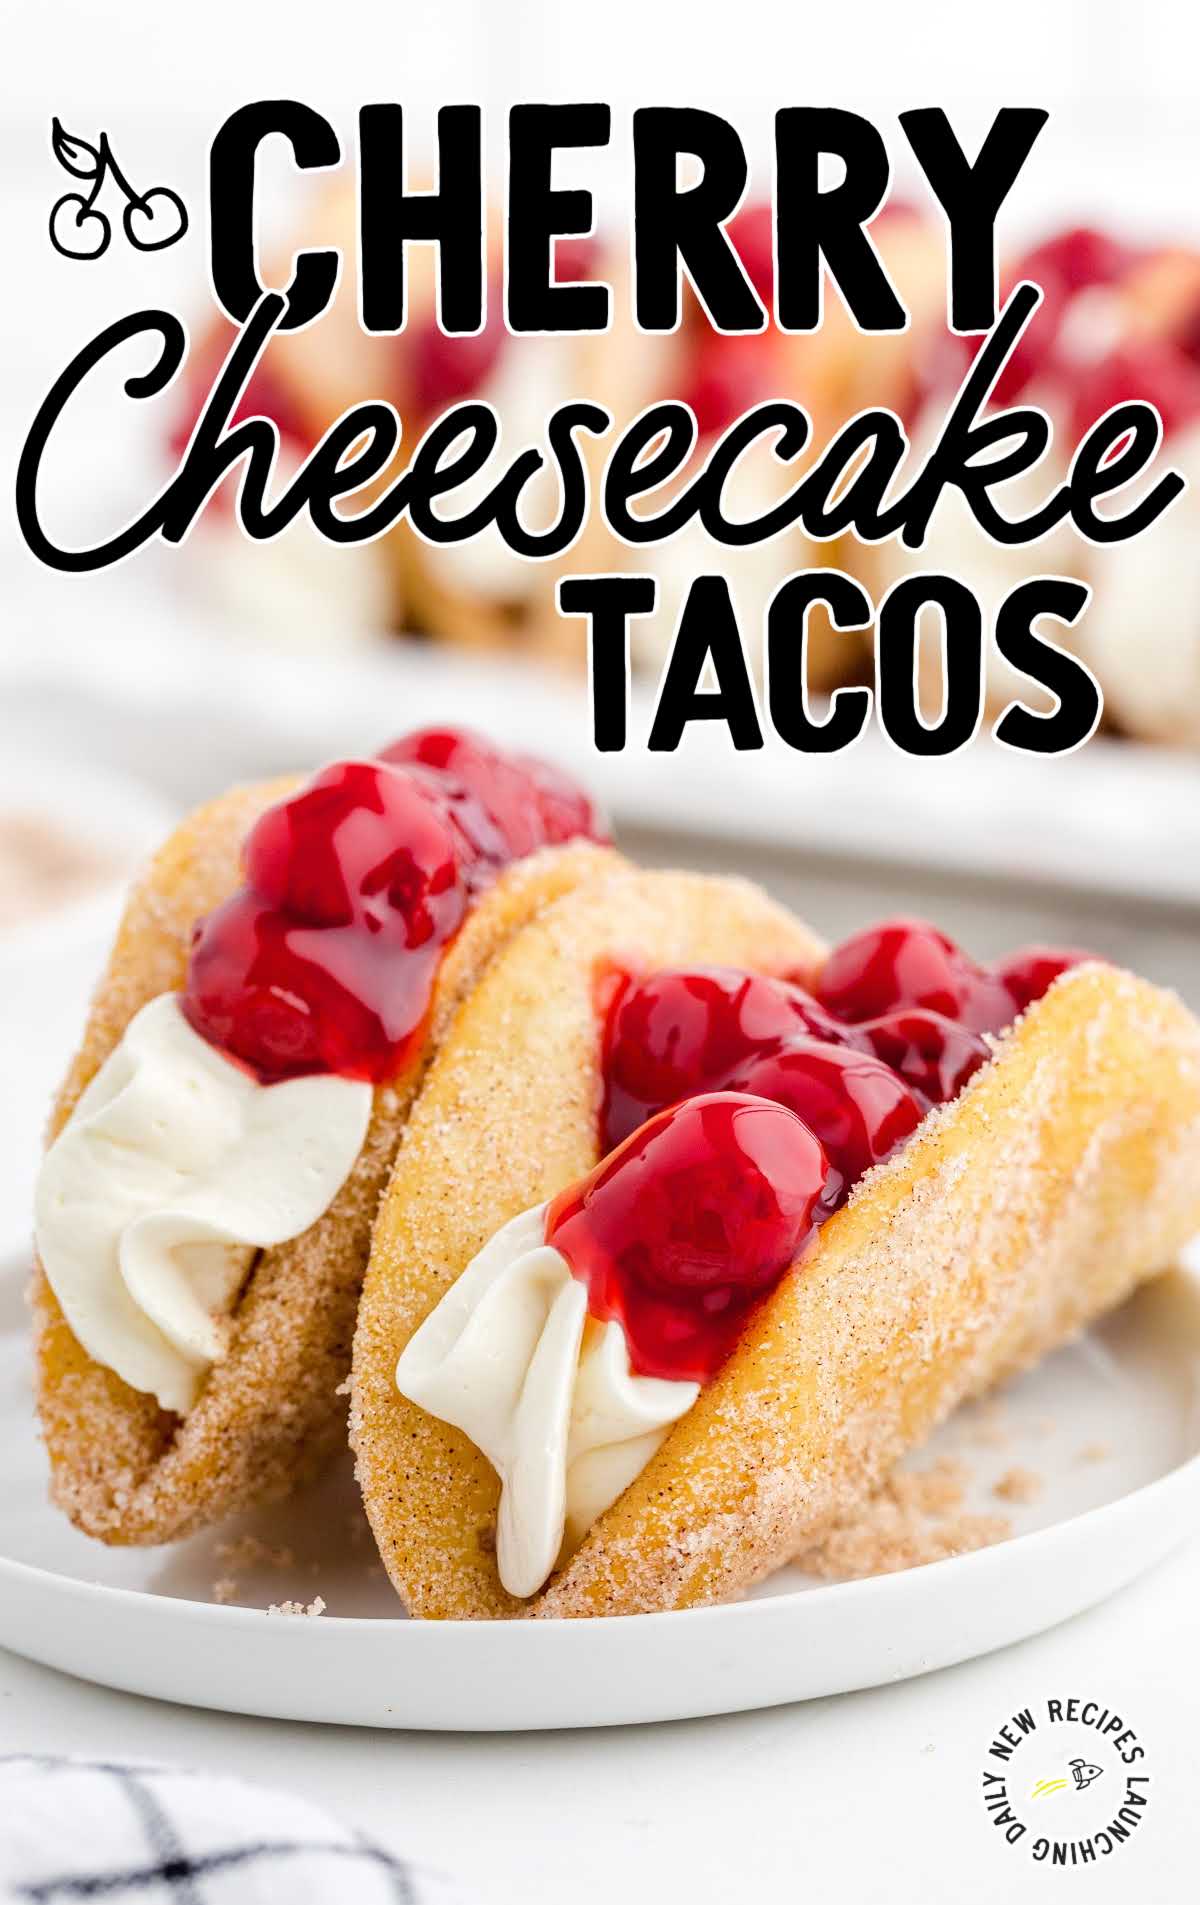 close up shot of Cherry Cheesecake Tacos on a plate